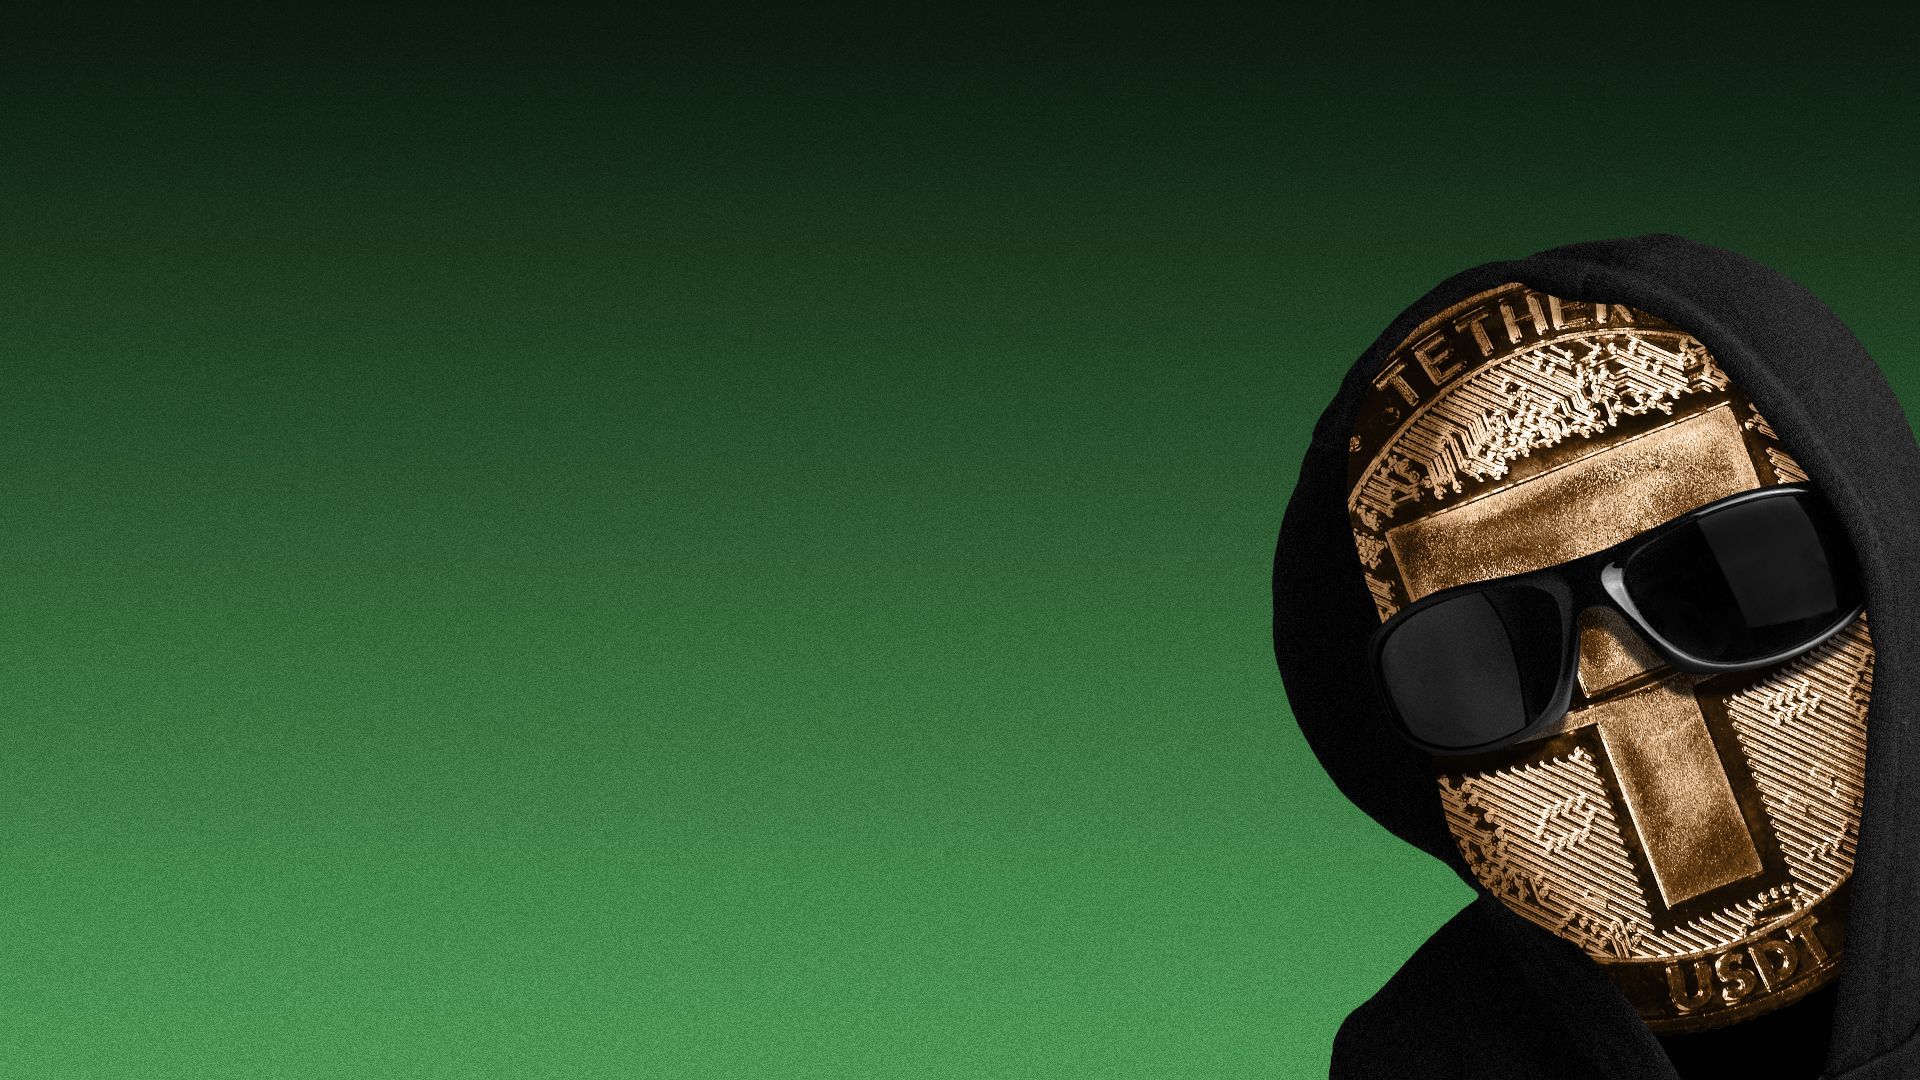 Illustration of the Tether coin wearing sunglasses and a hoodie.